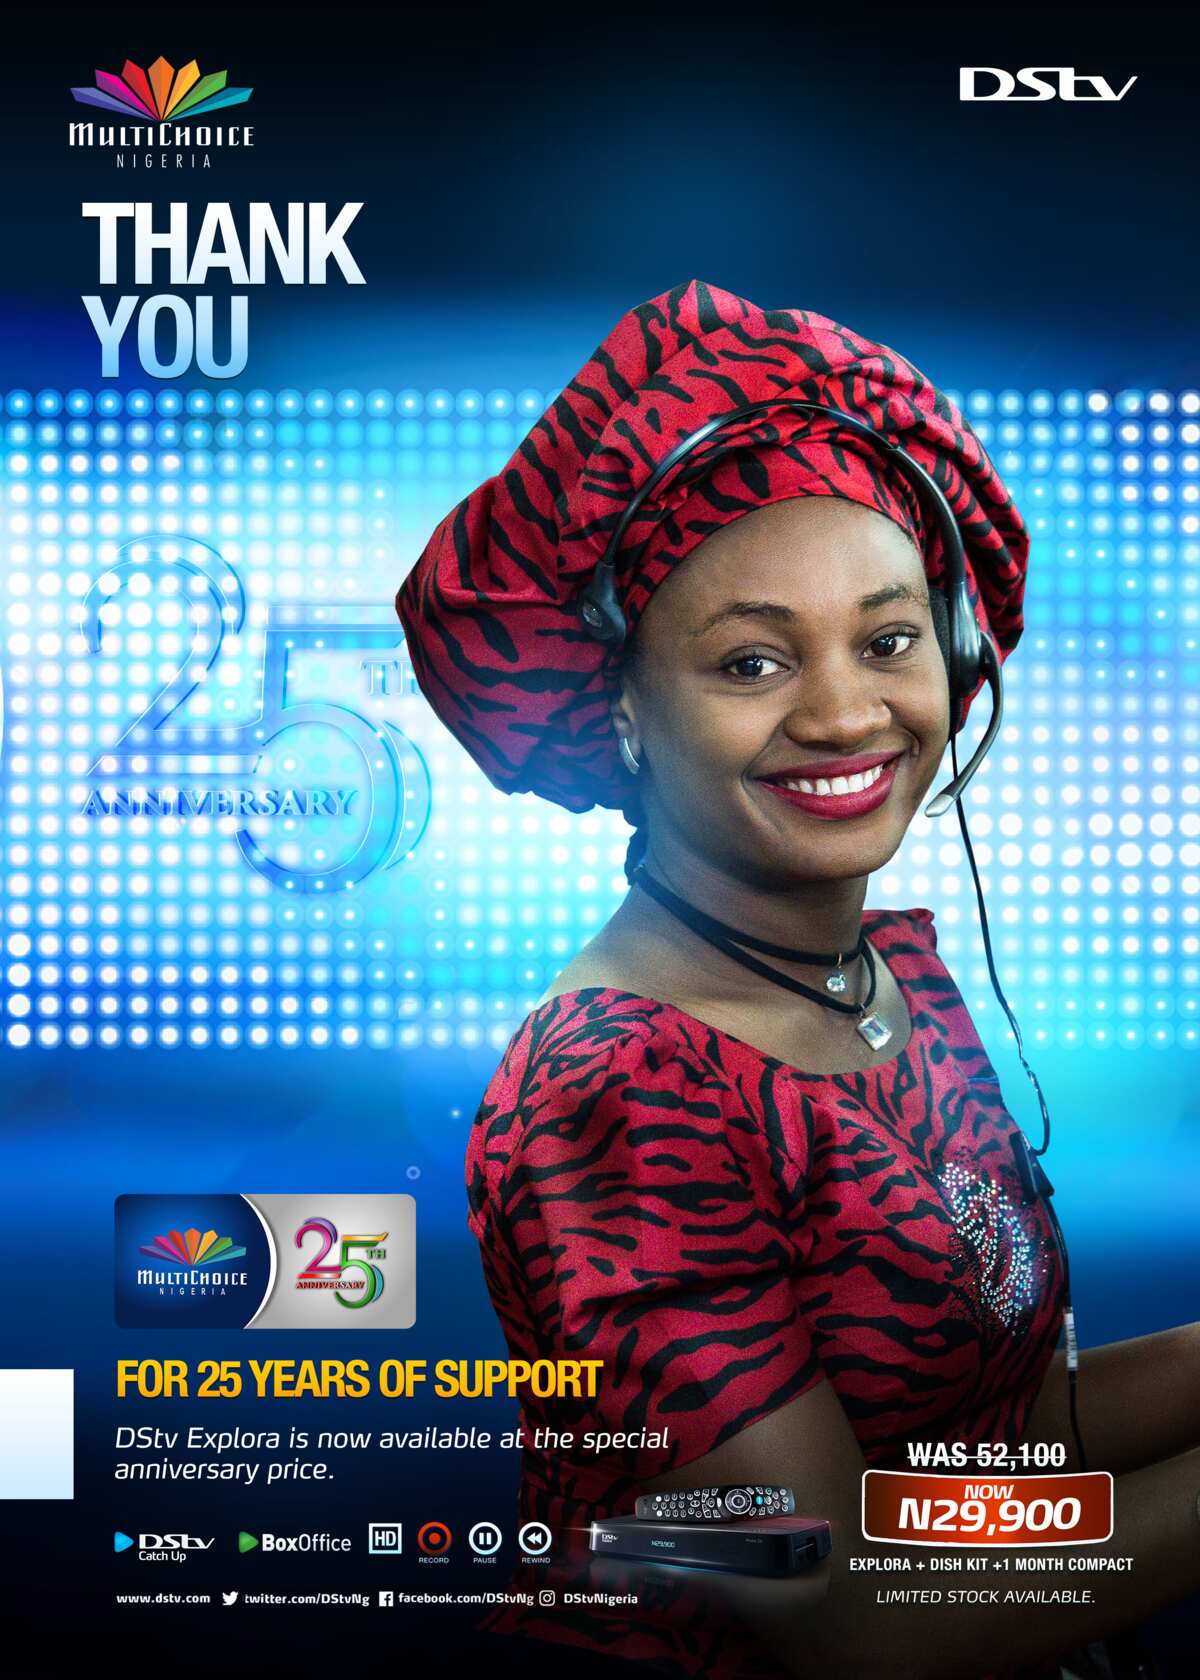 Our 'thank you' to everyone - DStv Explora